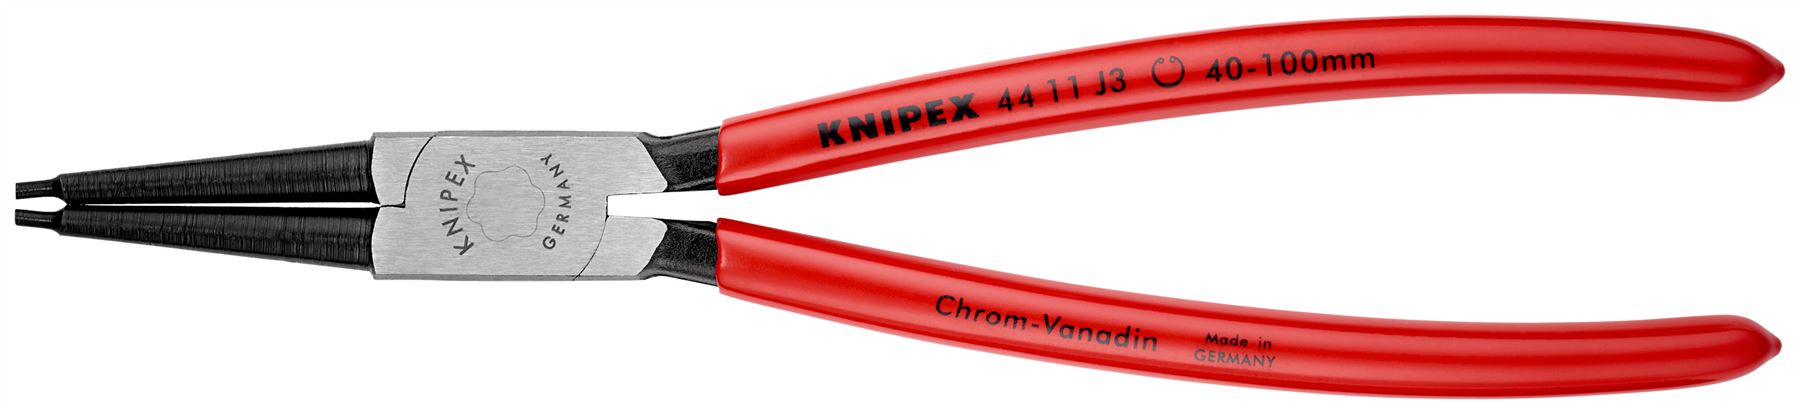 KNIPEX Circlip Pliers for Internal Circlips in Bore Holes 225mm 2.3mm Diameter Tips 44 11 J3